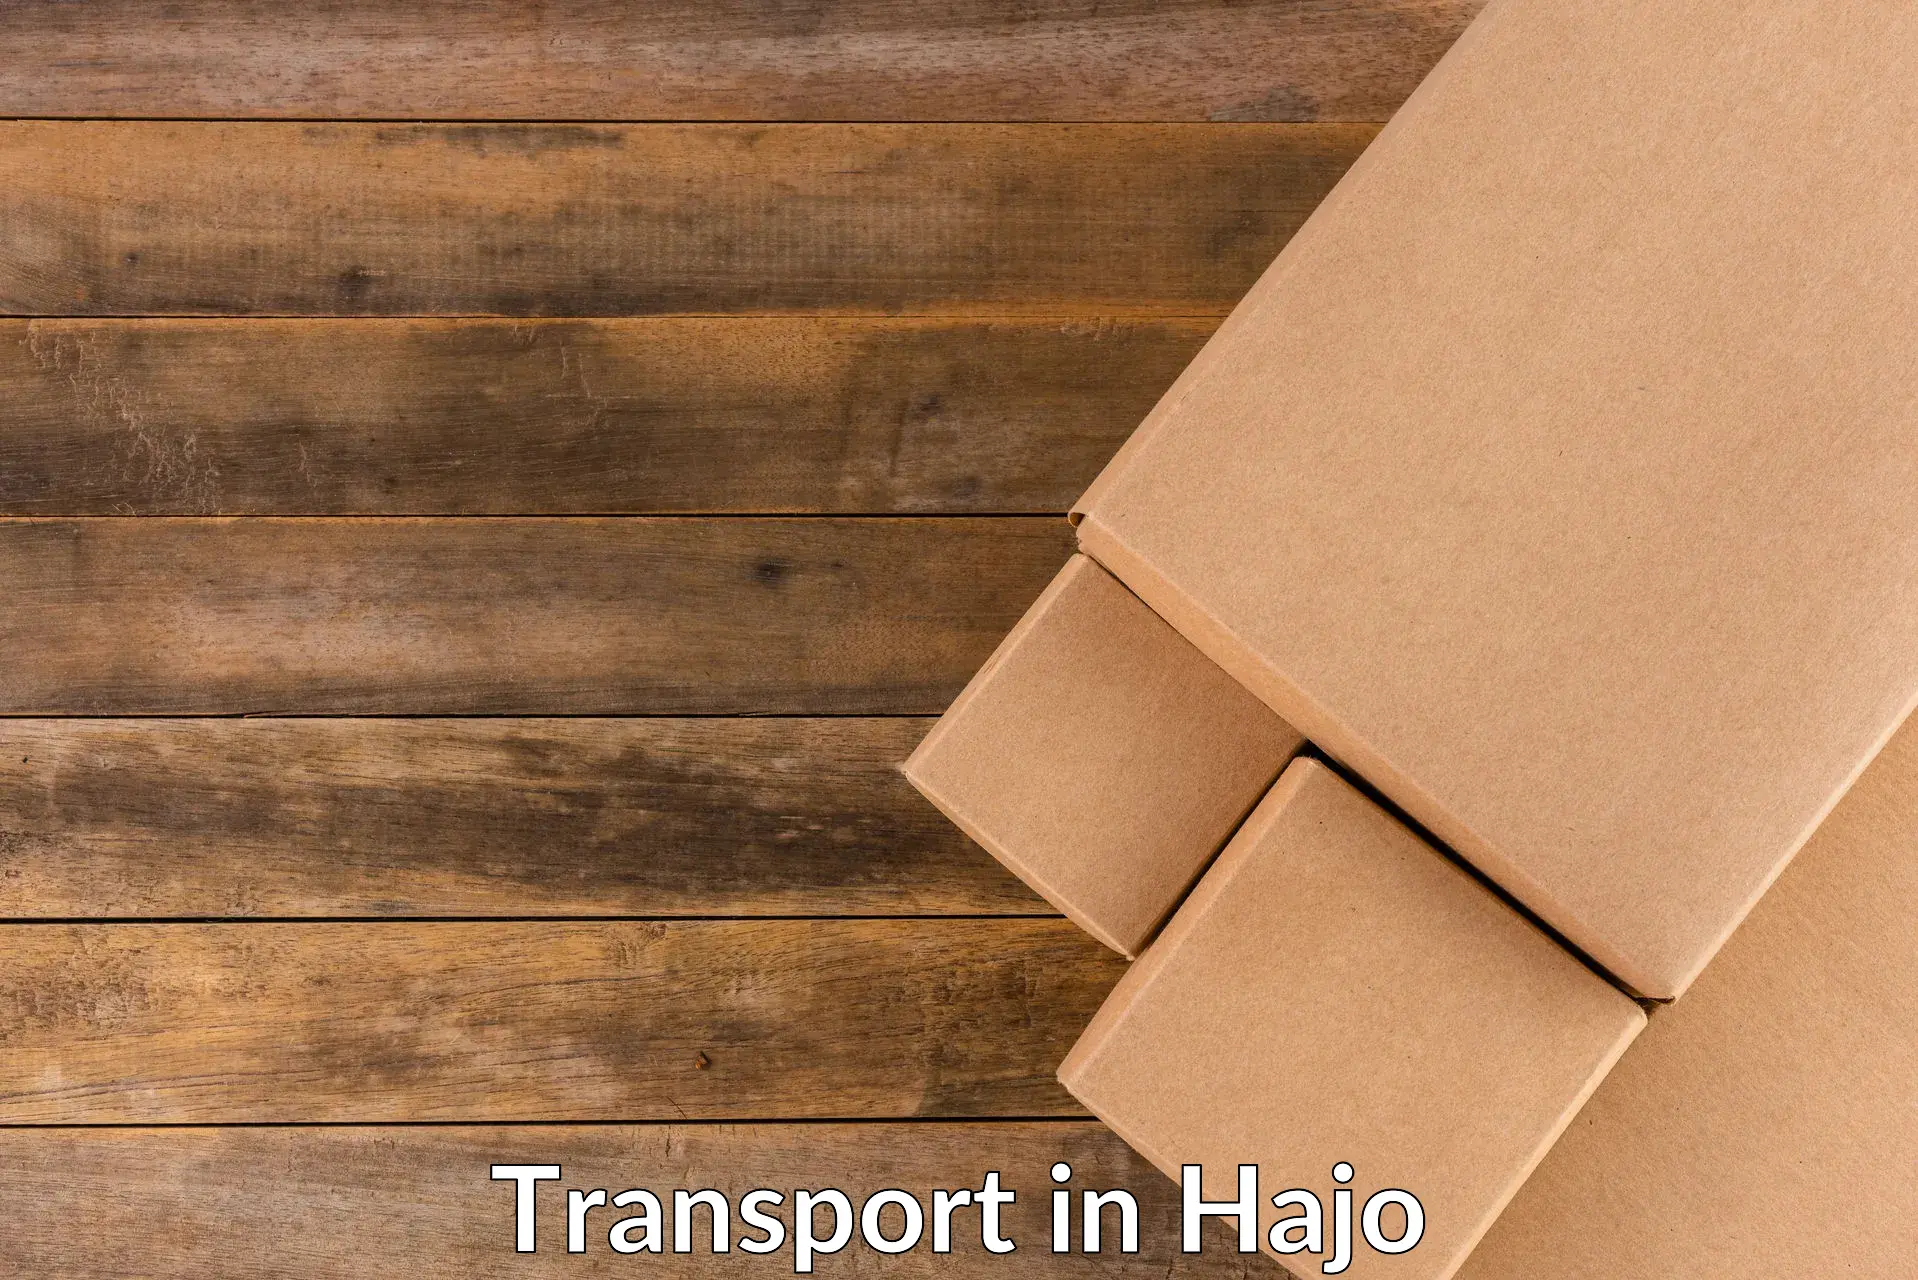 Air freight transport services in Hajo